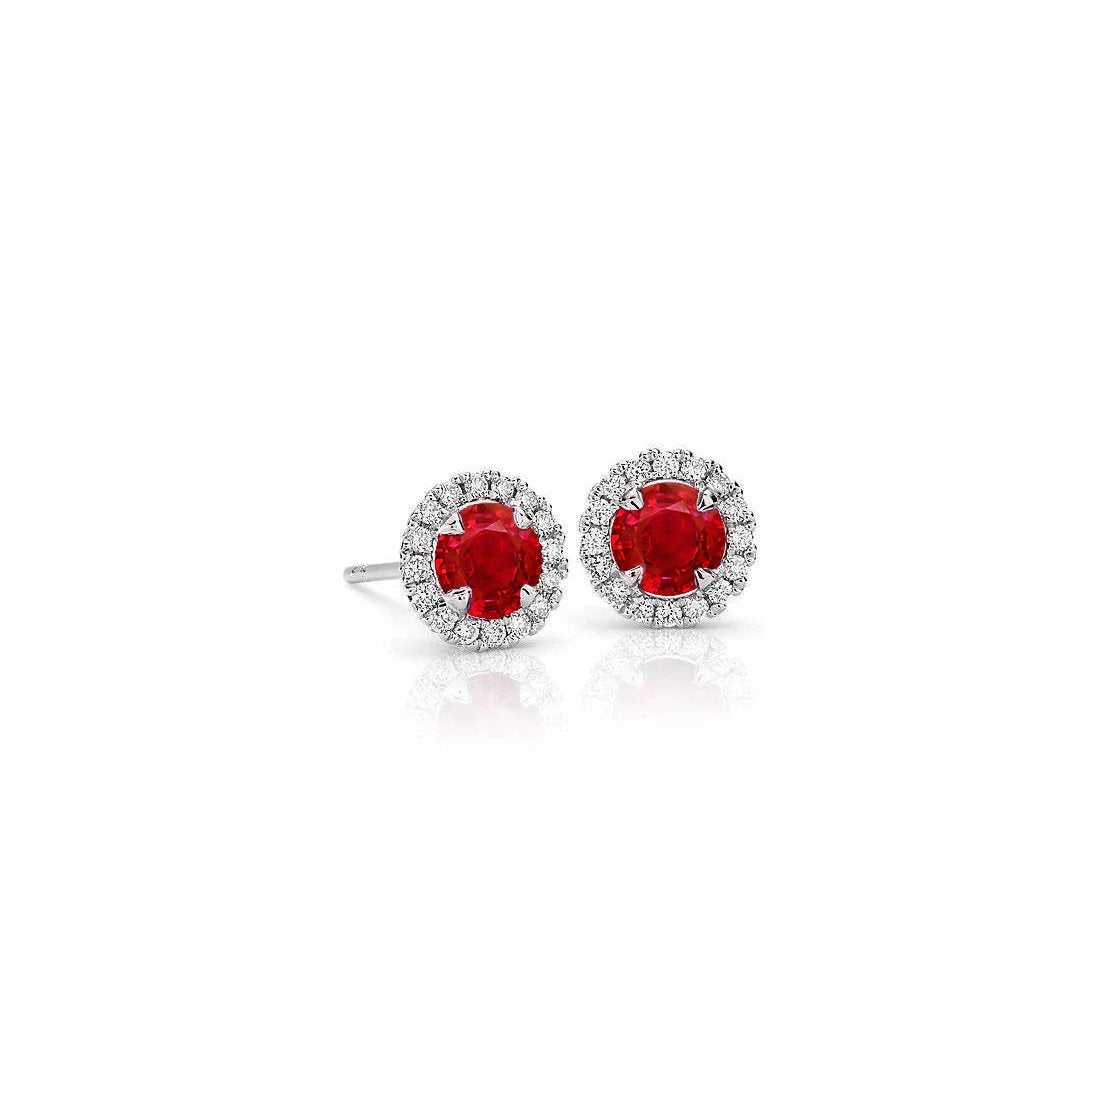 Halo Studs Earrings Gold White Round Cut 3.80 Ct. Ruby With Diamonds - Gemstone Earring-harrychadent.ca